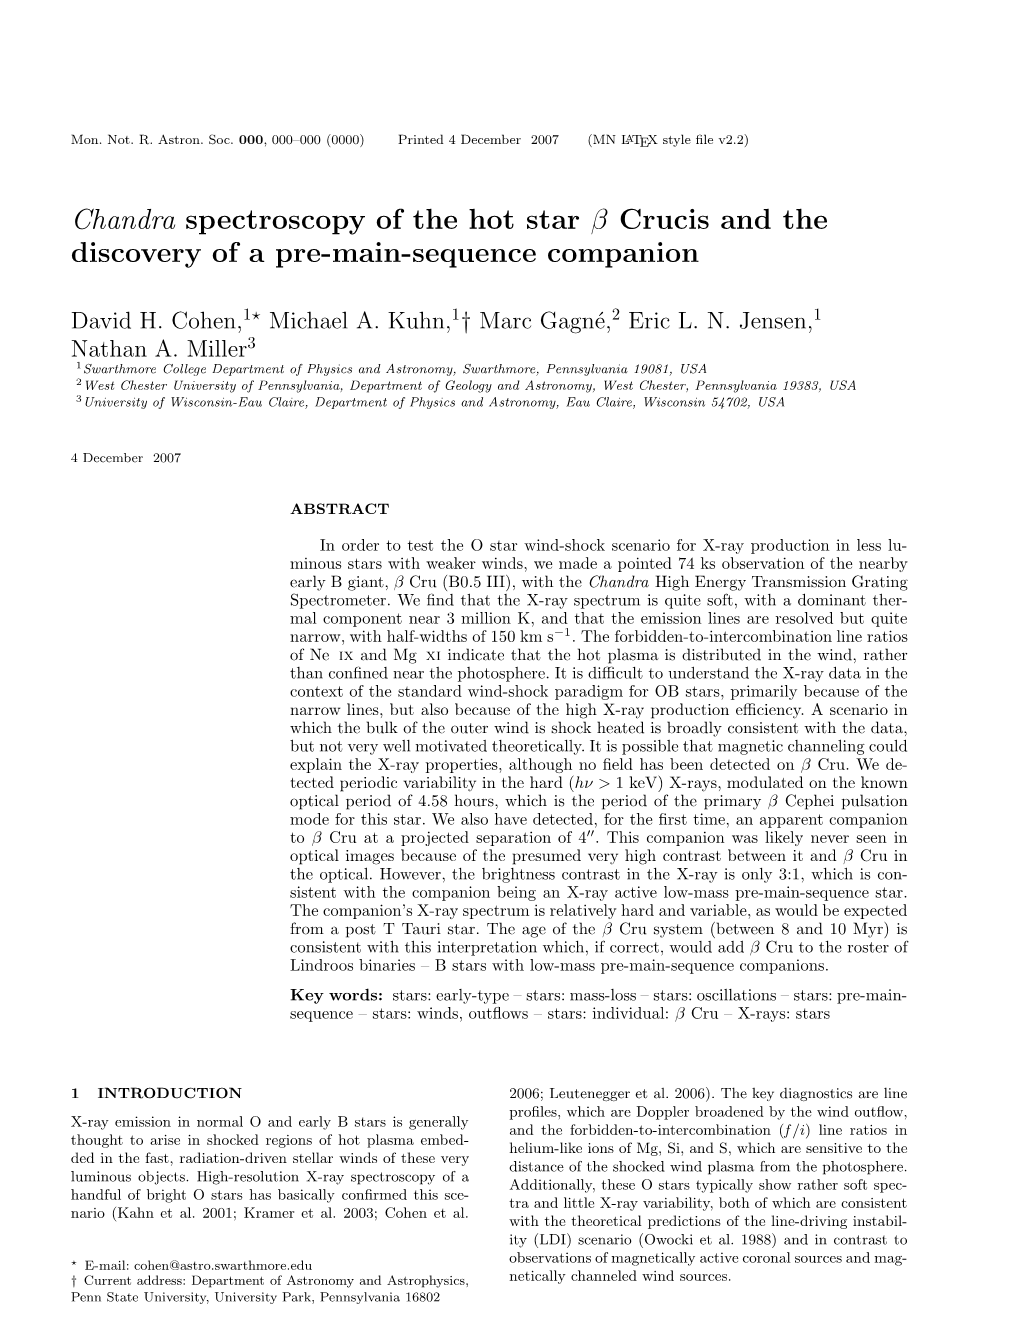 Chandra Spectroscopy of the Hot Star Β Crucis and the Discovery of a Pre-Main-Sequence Companion